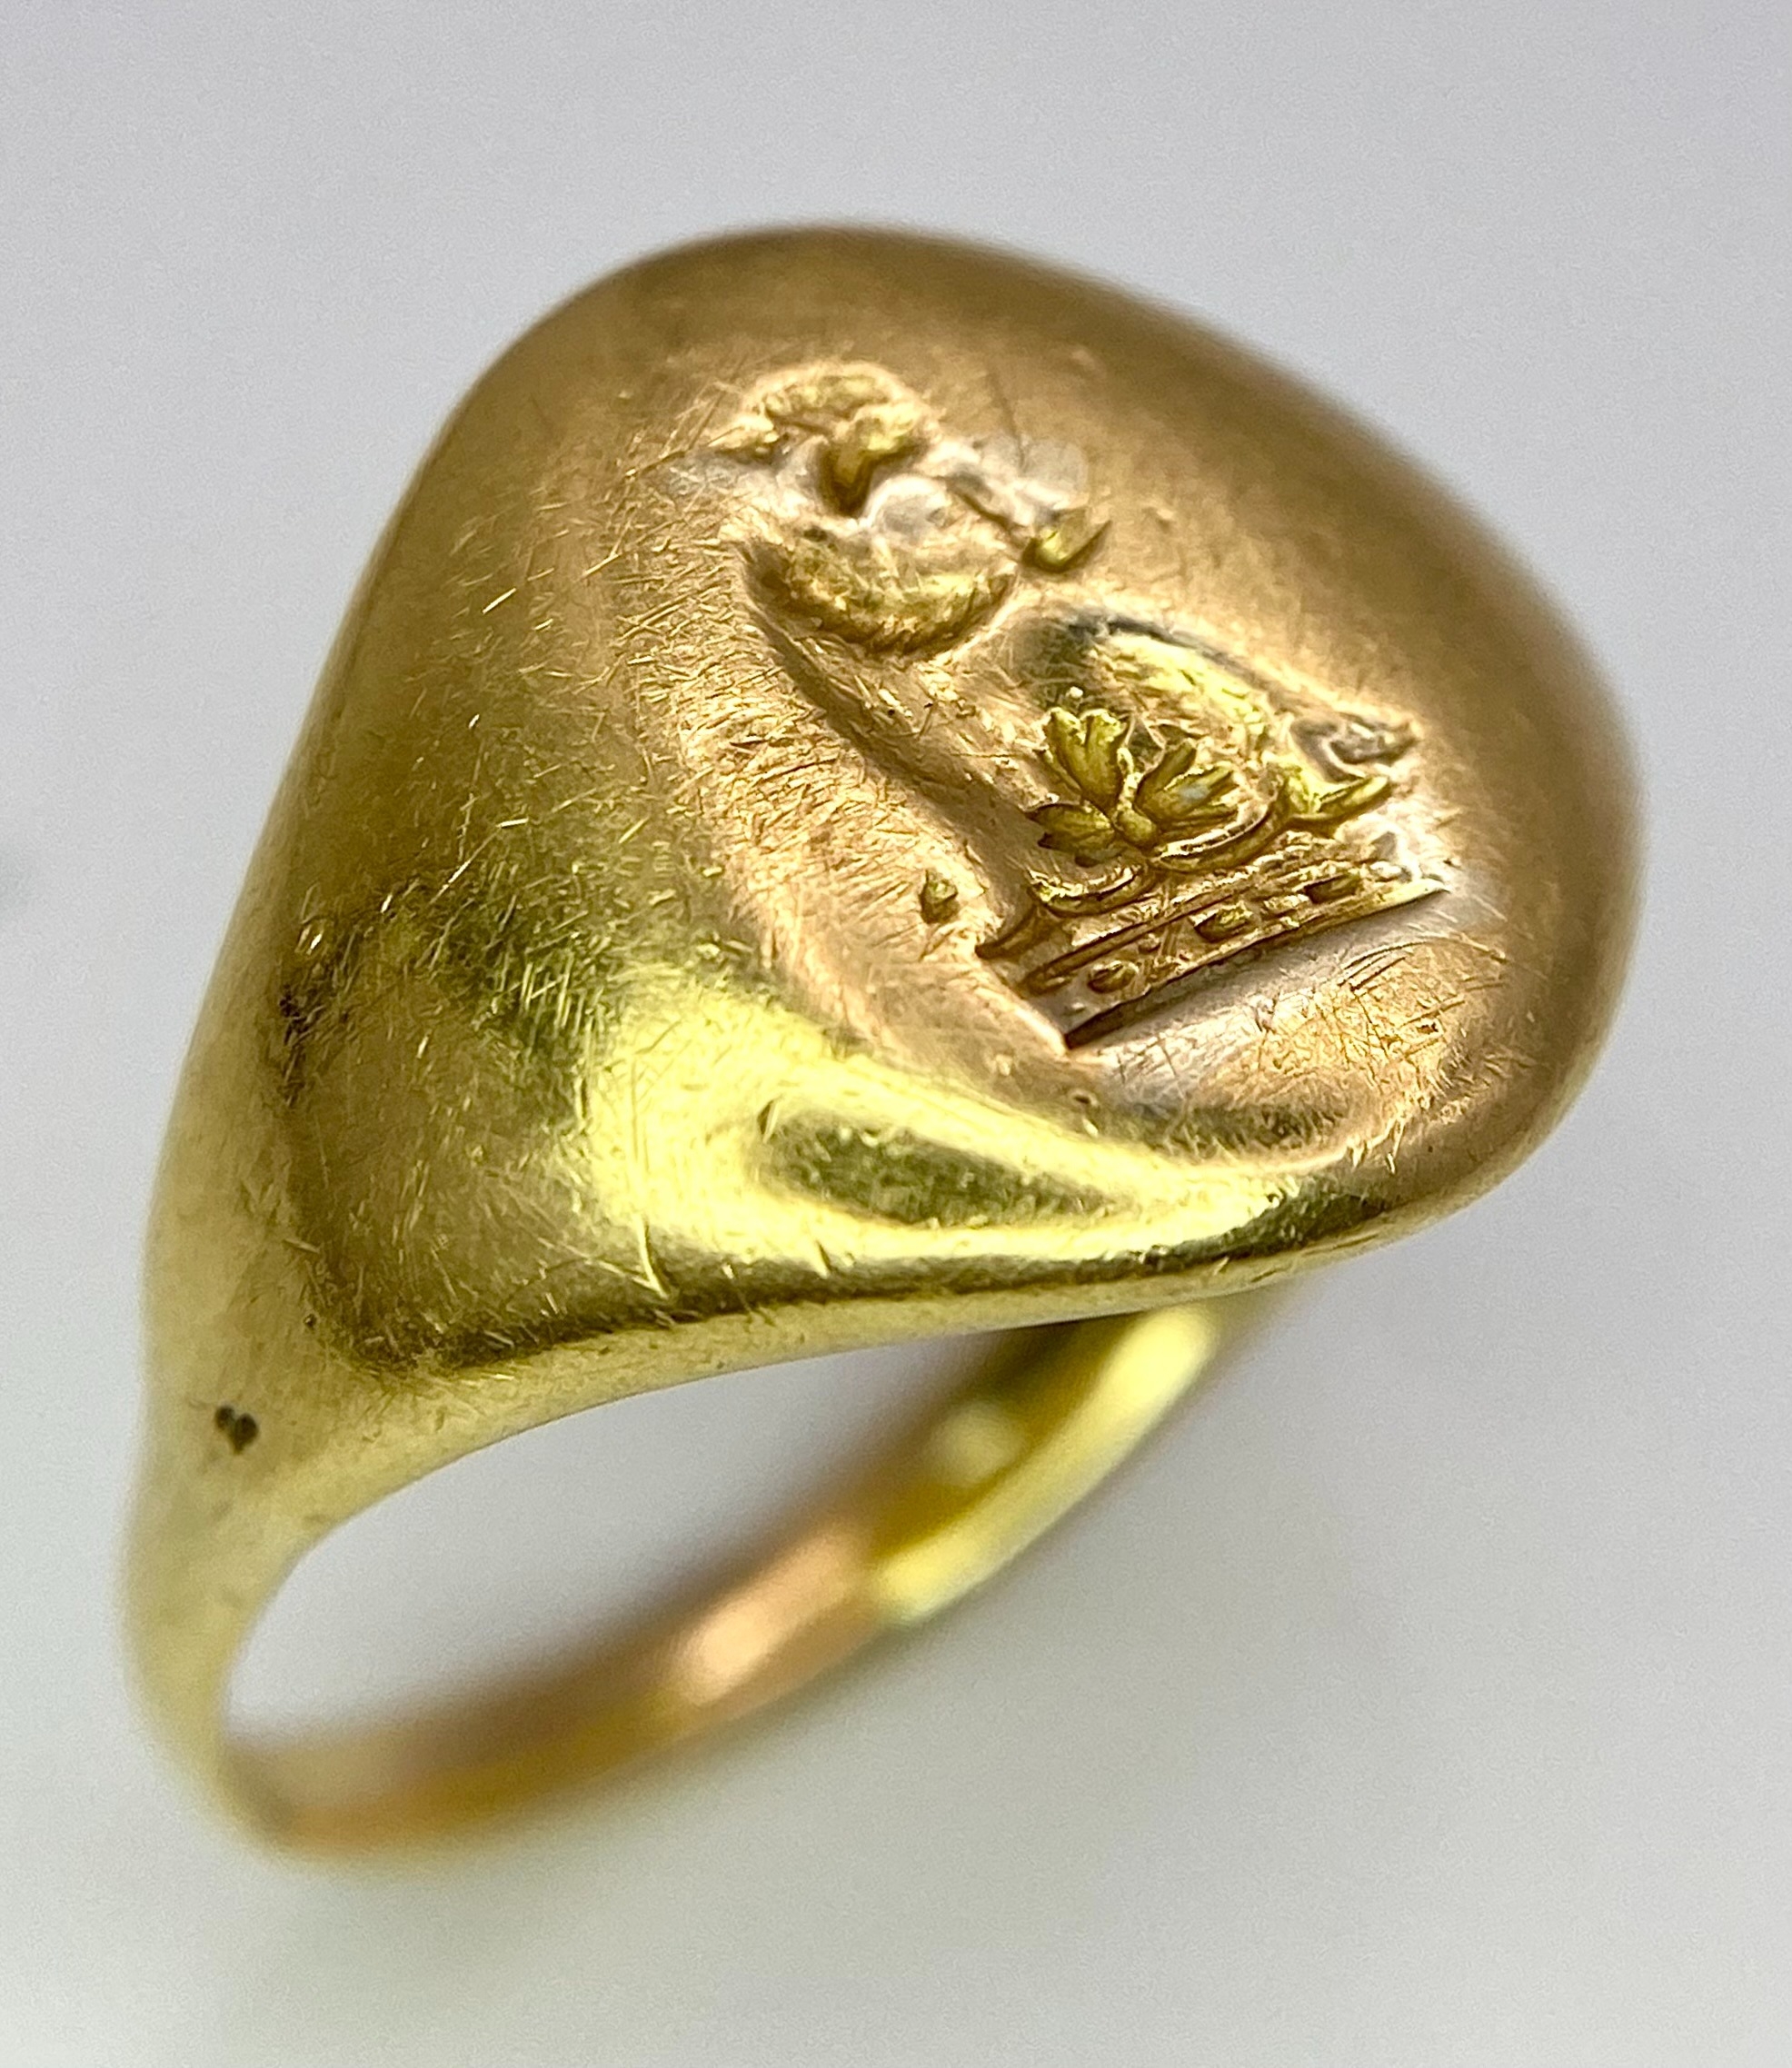 AN 18K YELLOW GOLD VINTAGE SEAL ENGRAVED SIGNET RING. Size K, 7.8g total weight. Ref: SC 8060 - Image 2 of 9